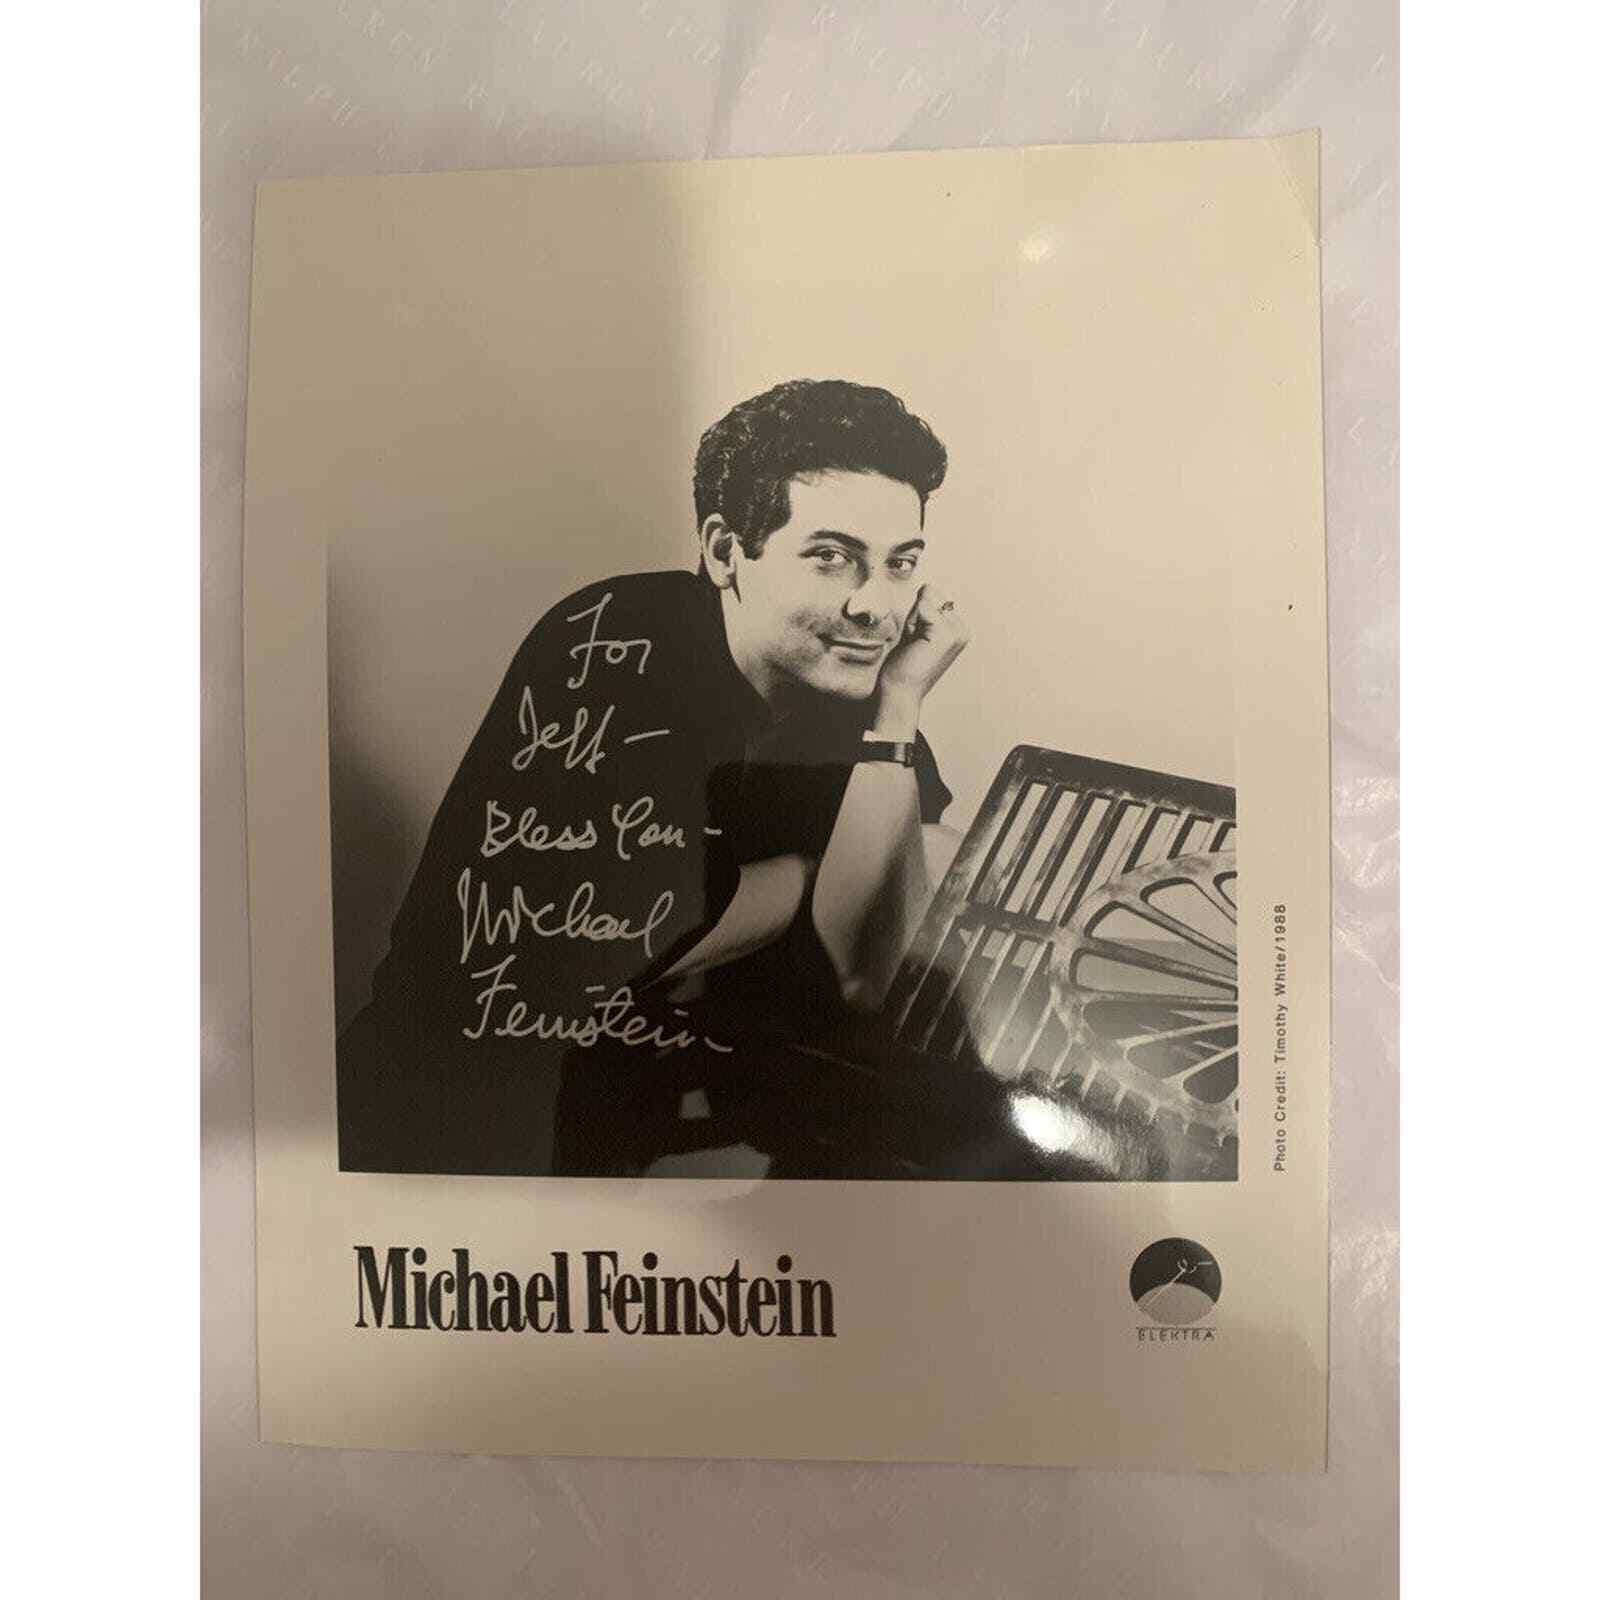 Michael Feinstein - INSCRIBED PHOTOGRAPH SIGNED 8 x 10 Lobby Card